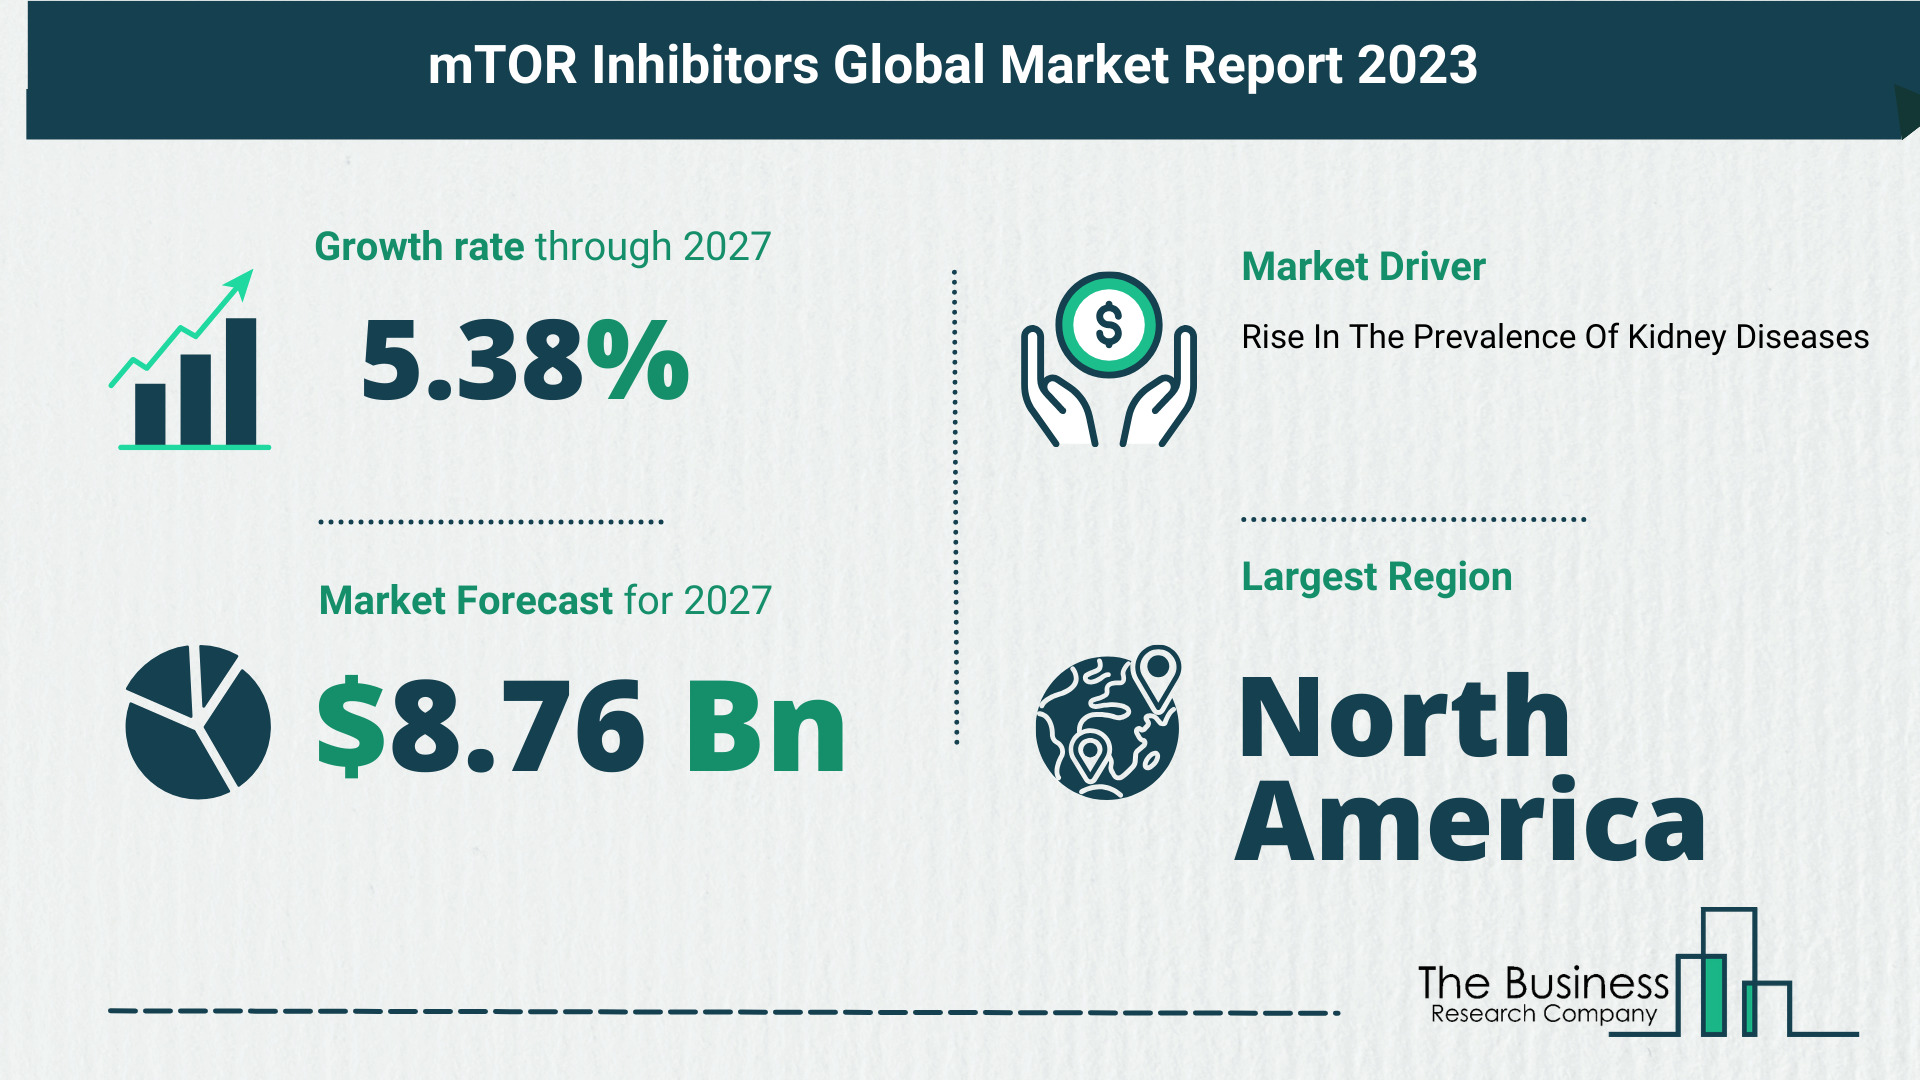 Key Trends And Drivers In The MTOR Inhibitors Market 2023